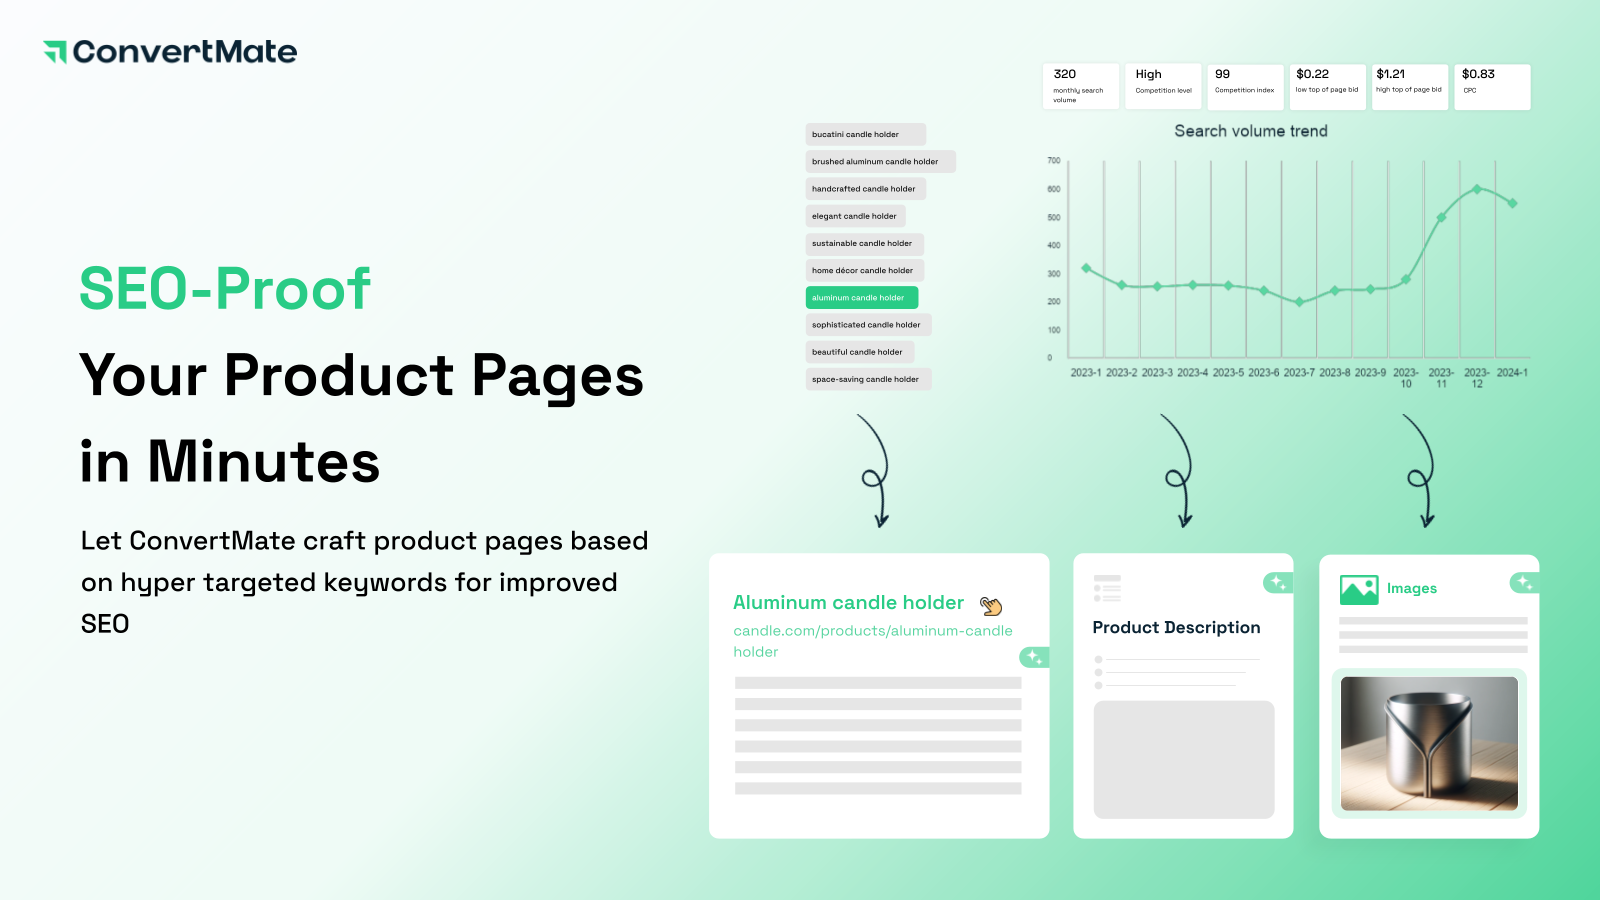 SEO-Proof Your Product Pages in Minutes